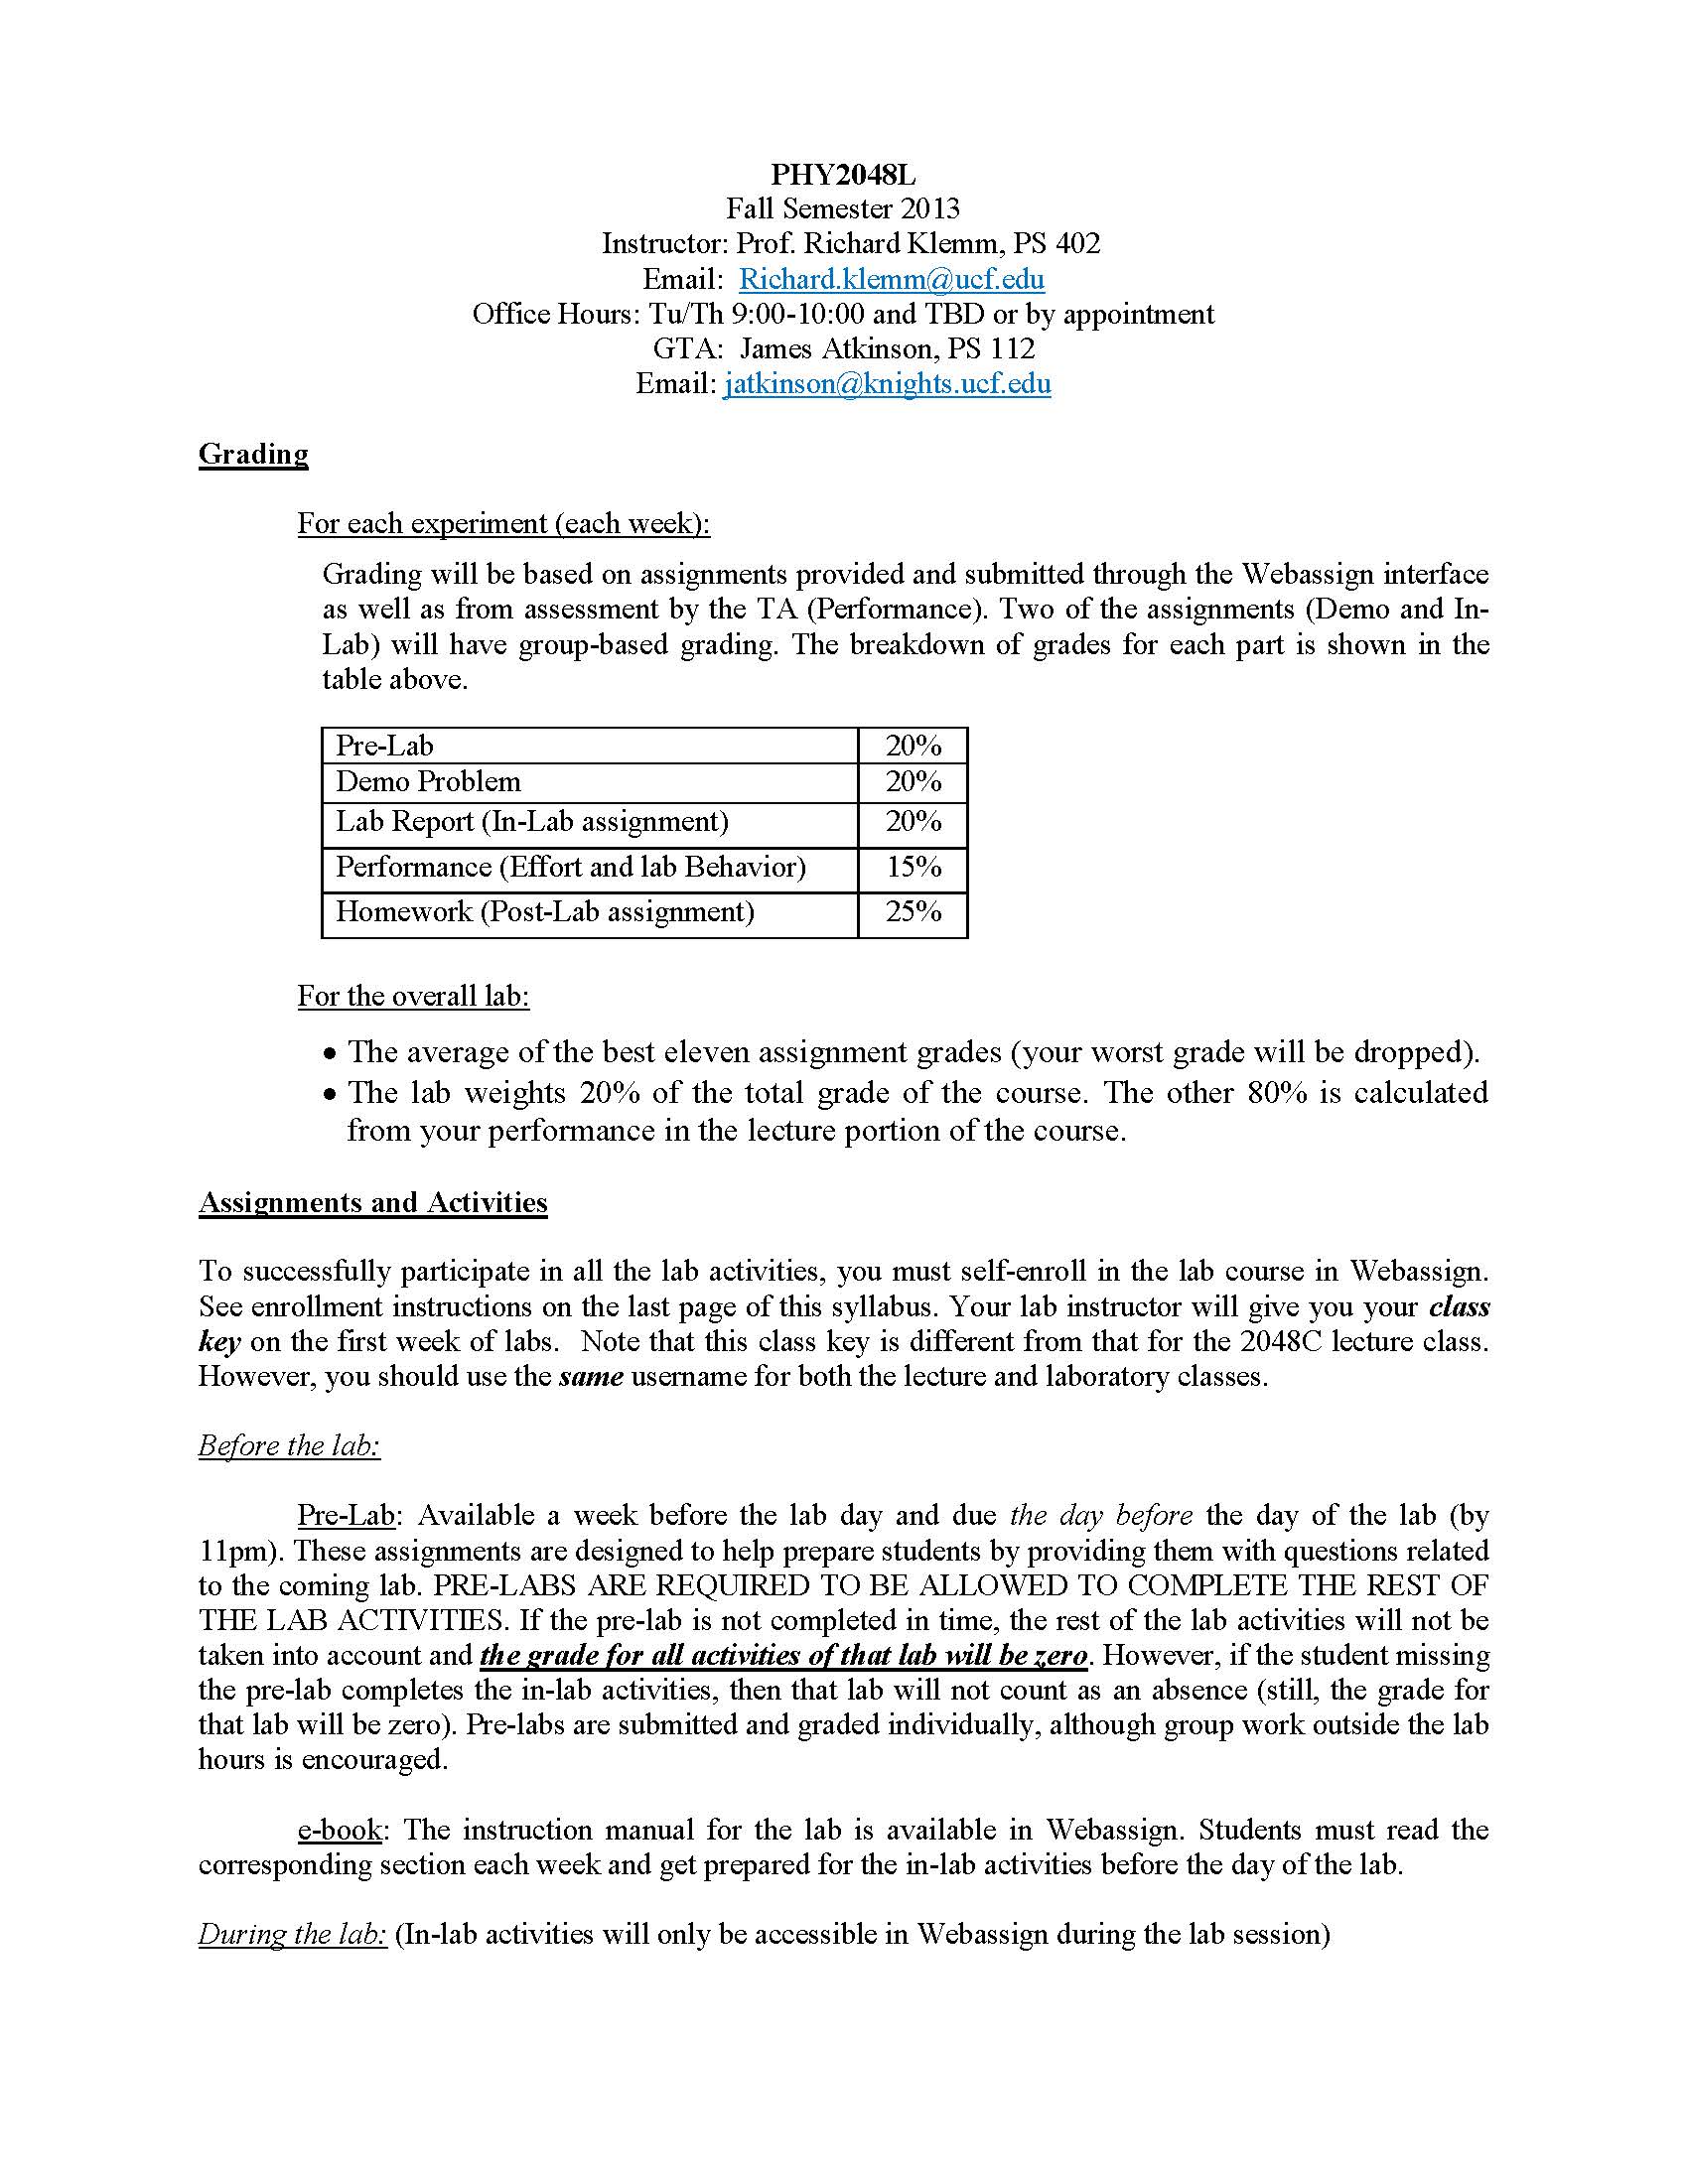 PHY2048L Section 0211 Syllabus page 1